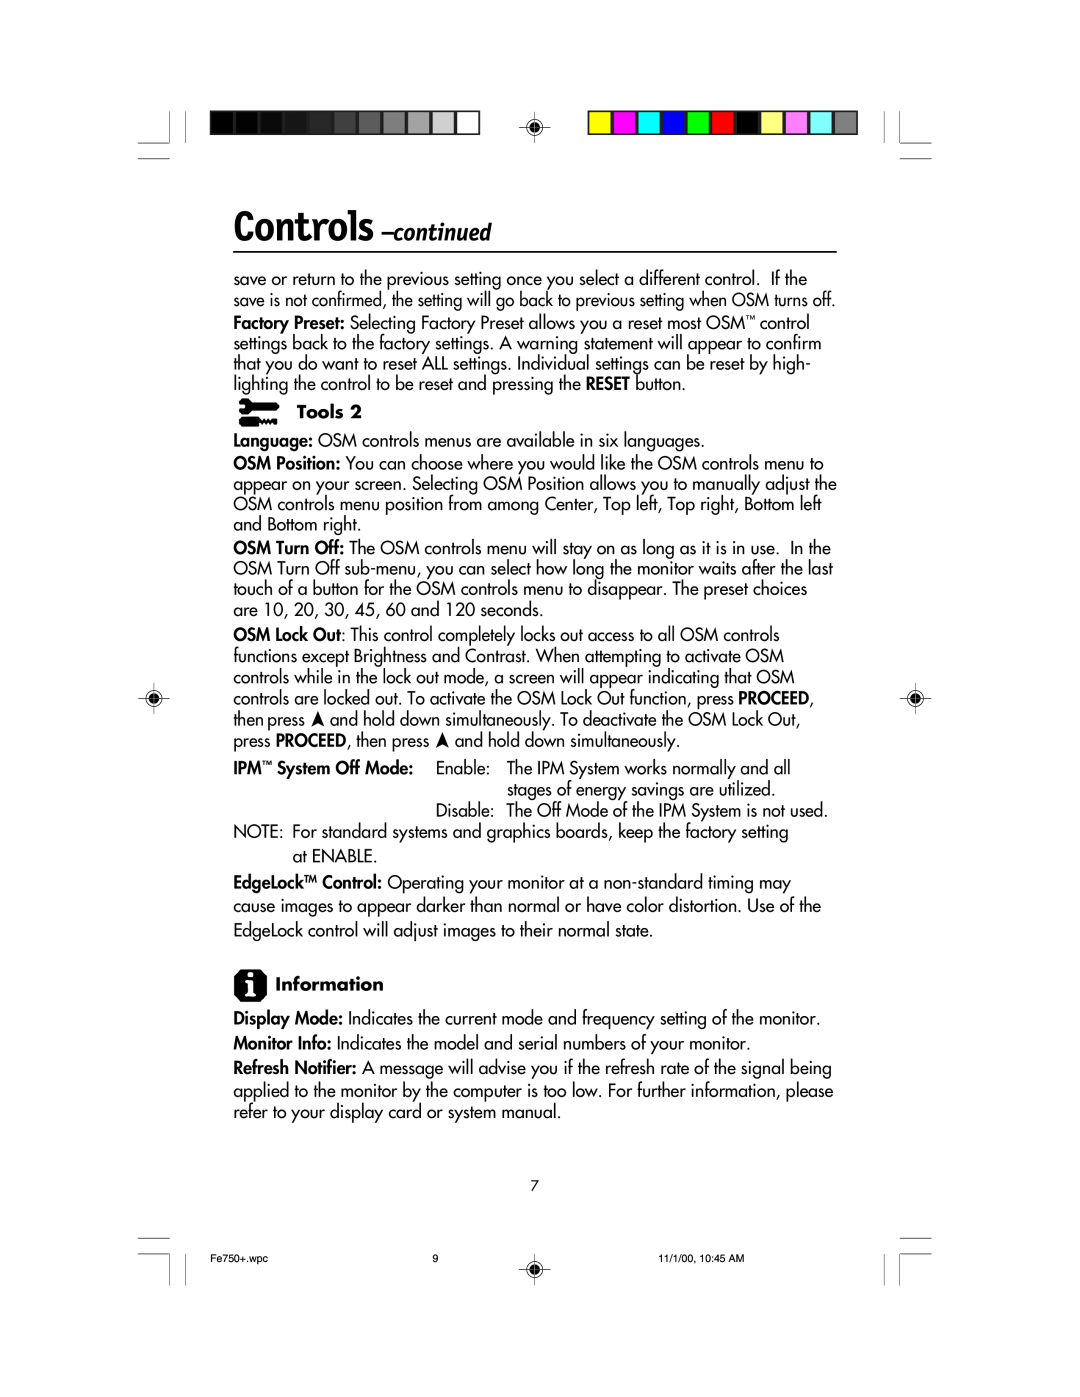 NEC FE750 Plus user manual Controls -continued, Language OSM controls menus are available in six languages 